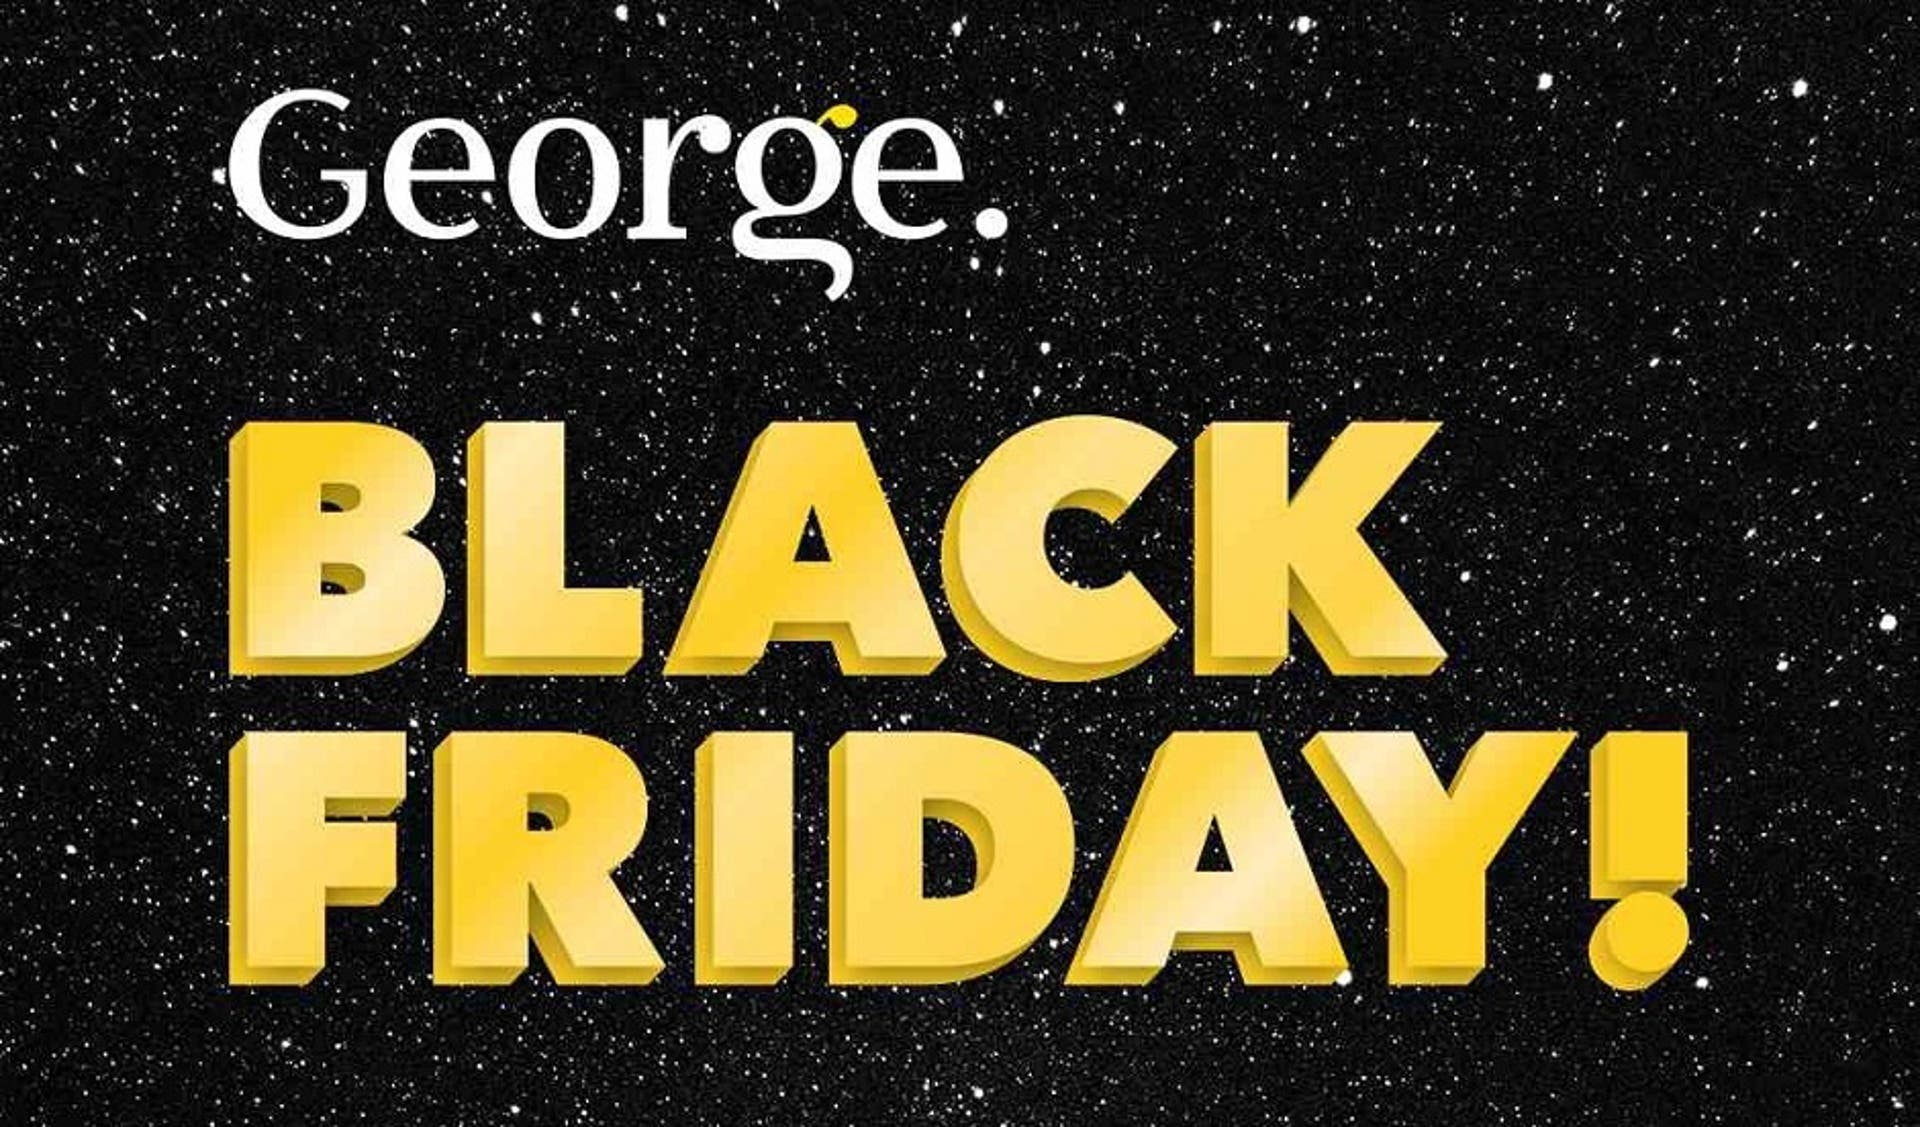  A digital illustration of the words 'George' and 'Black Friday' on a black background with stars. 